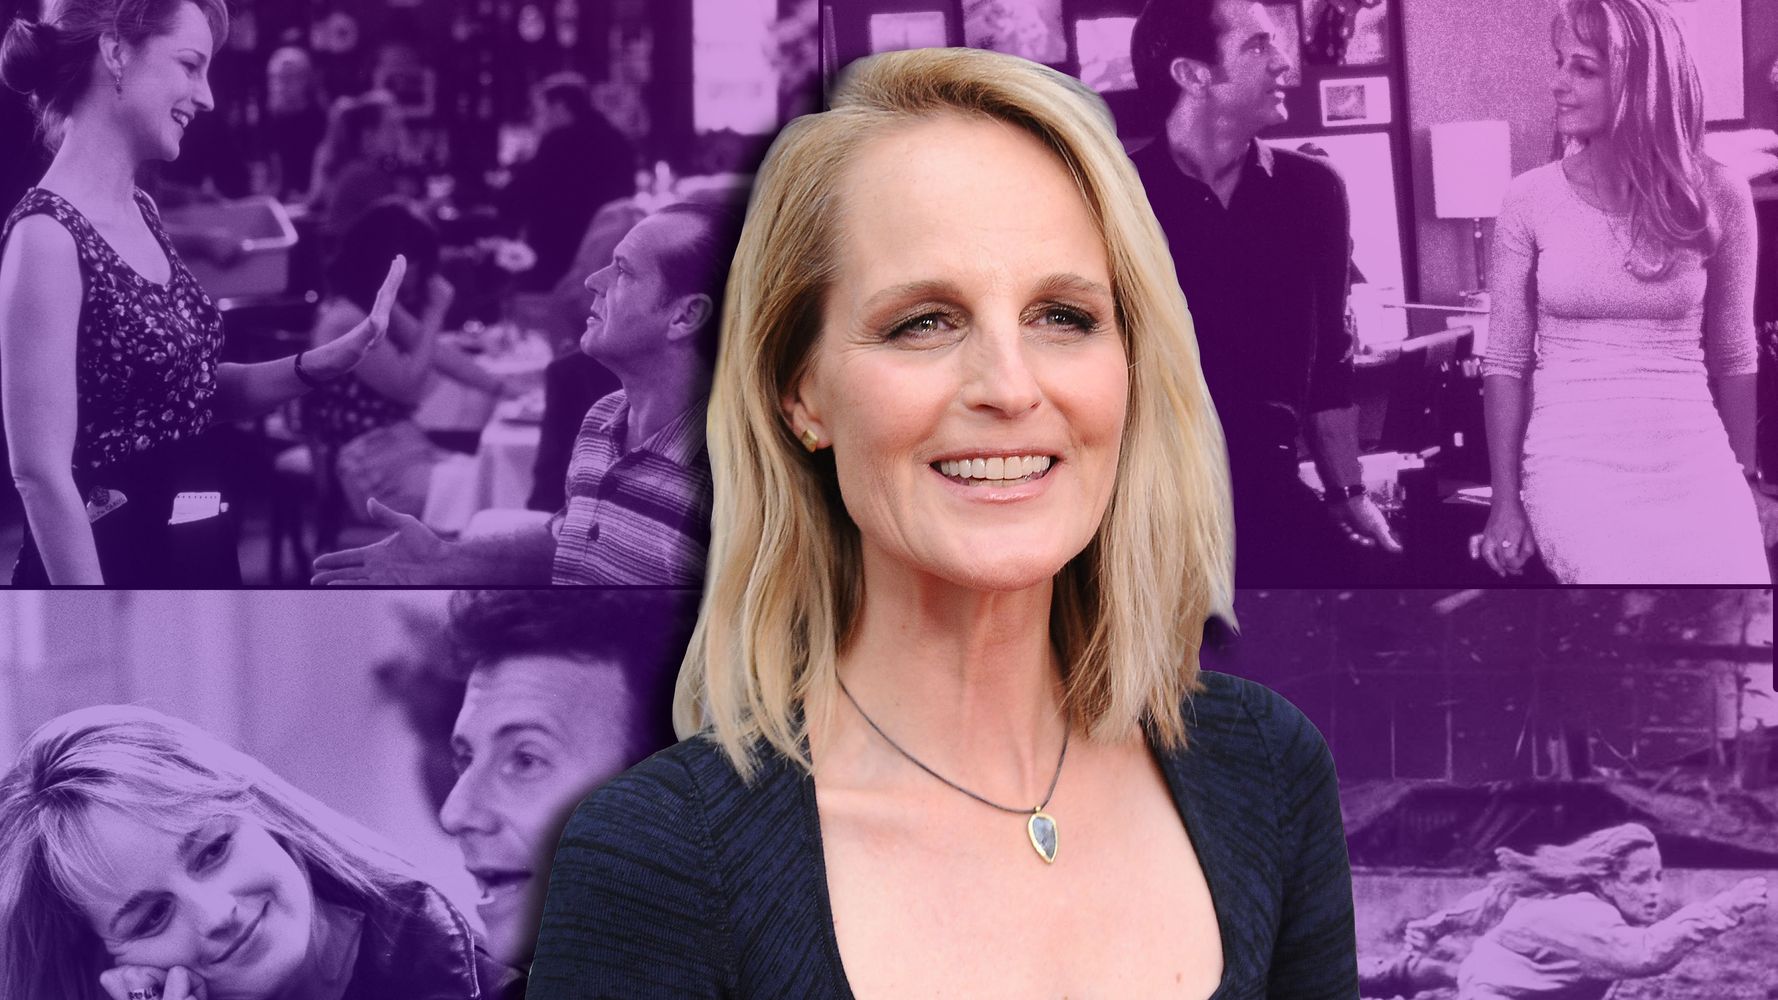 Margaret Wood - Helen Hunt Has Been Working This Whole Time, Maybe You Just Didn't Notice |  HuffPost Entertainment